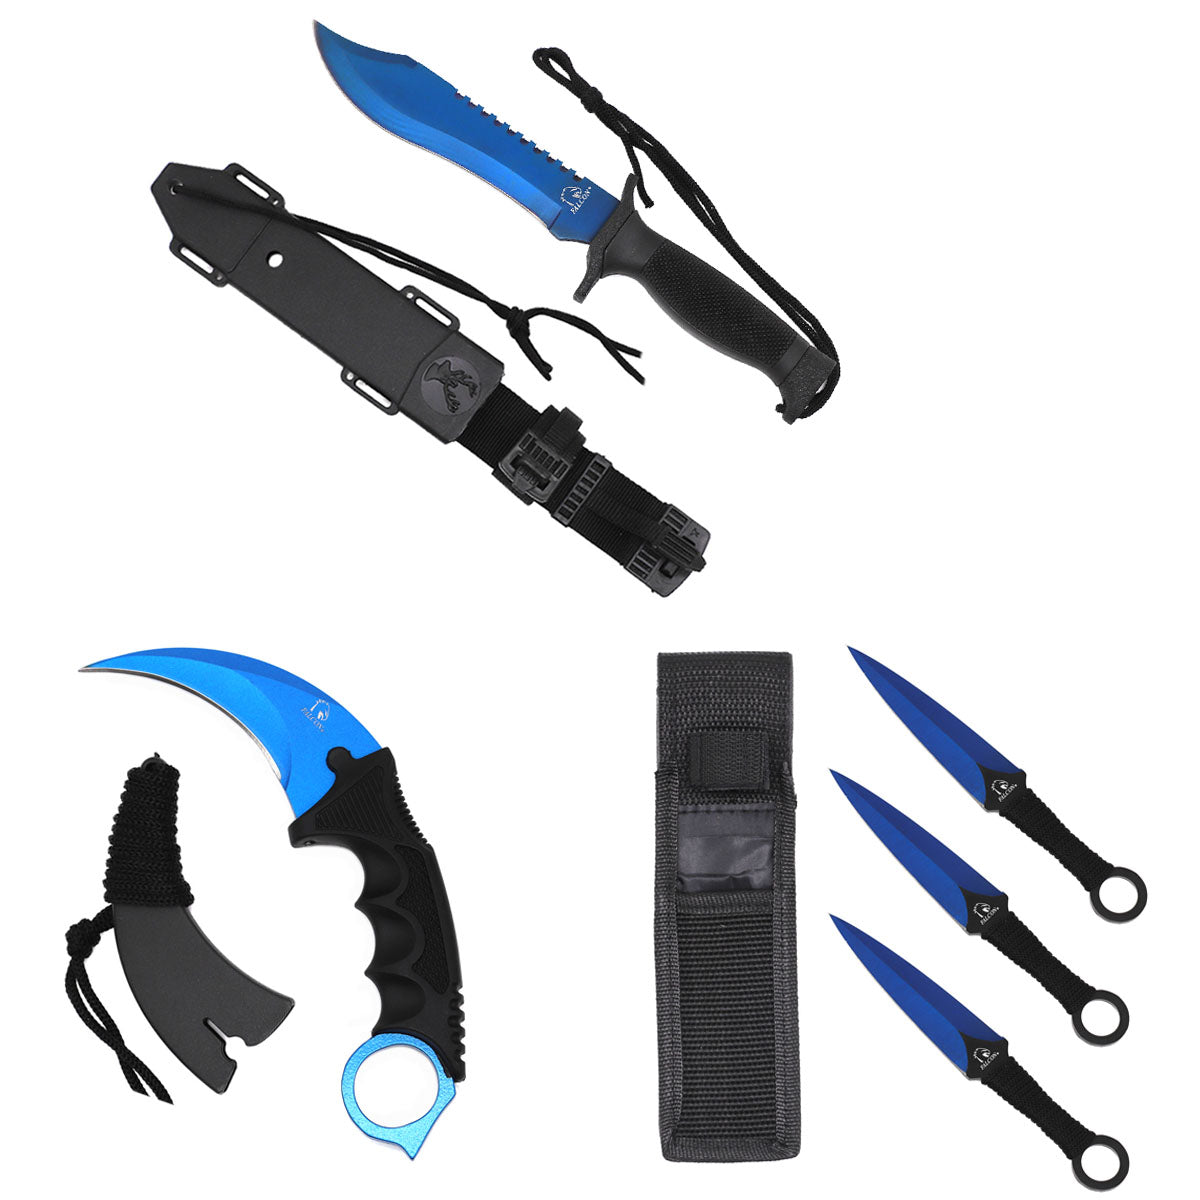 falcon-hunting-knives-3-piece-set-blue